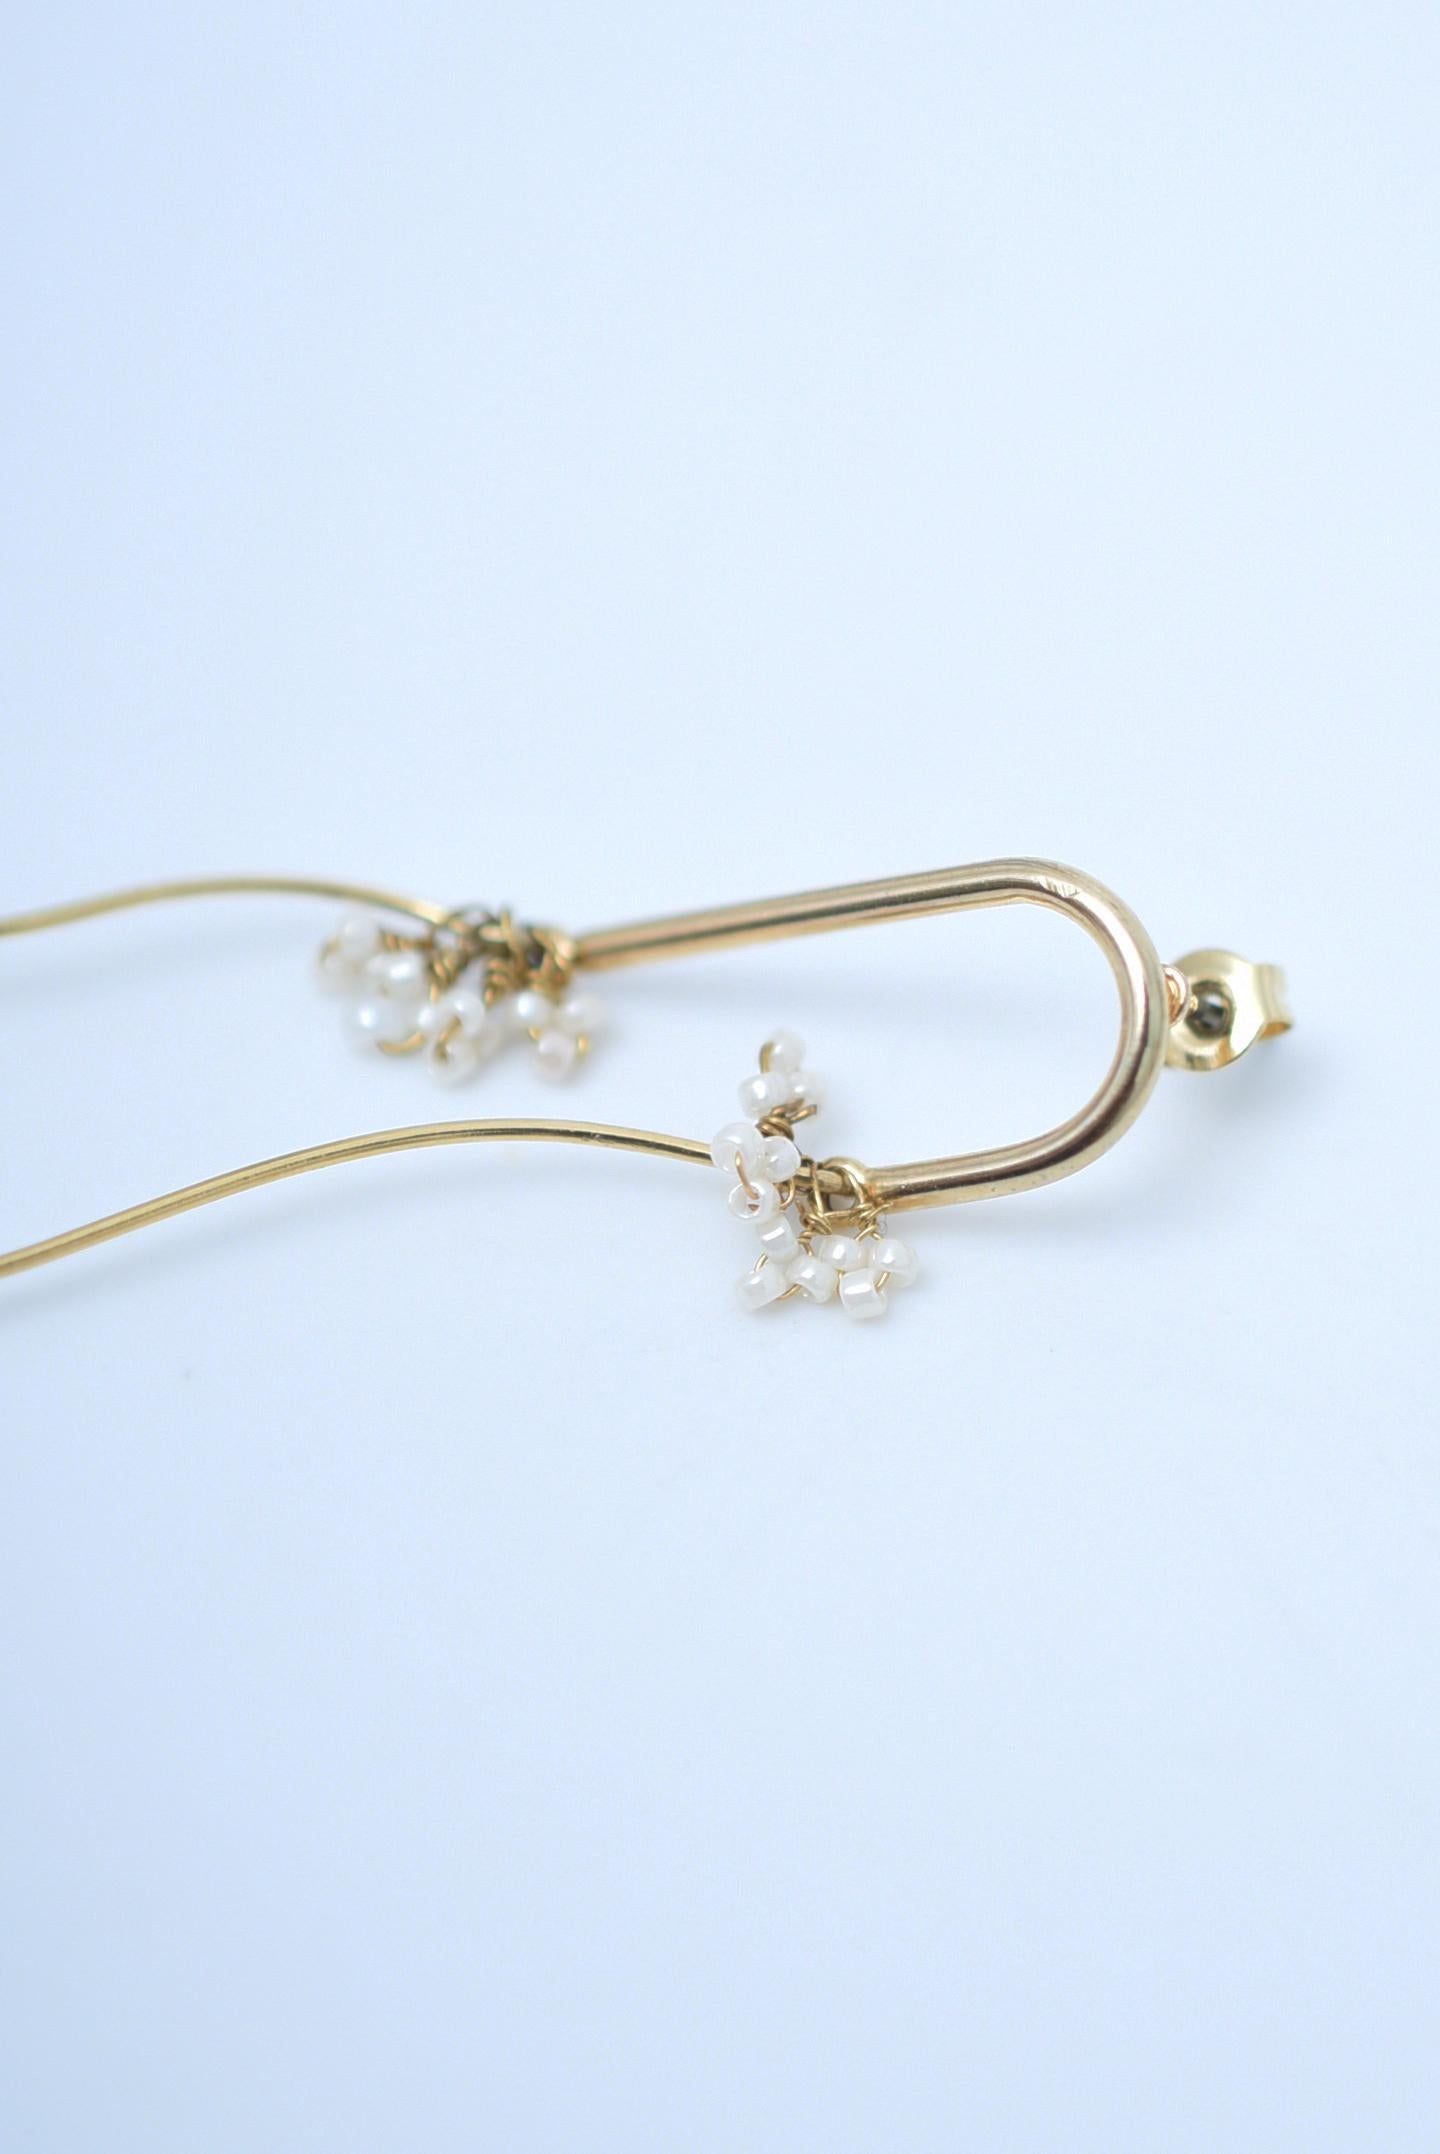 material:Brass, Vintage 1970s Japanese glass pearls,glass beads,stainless
size:length 7cm

Neat and delicate earrings.
A pretty item that can be used for a variety of occasions, regardless of the clothes you wear with it, even for everyday wear.
The